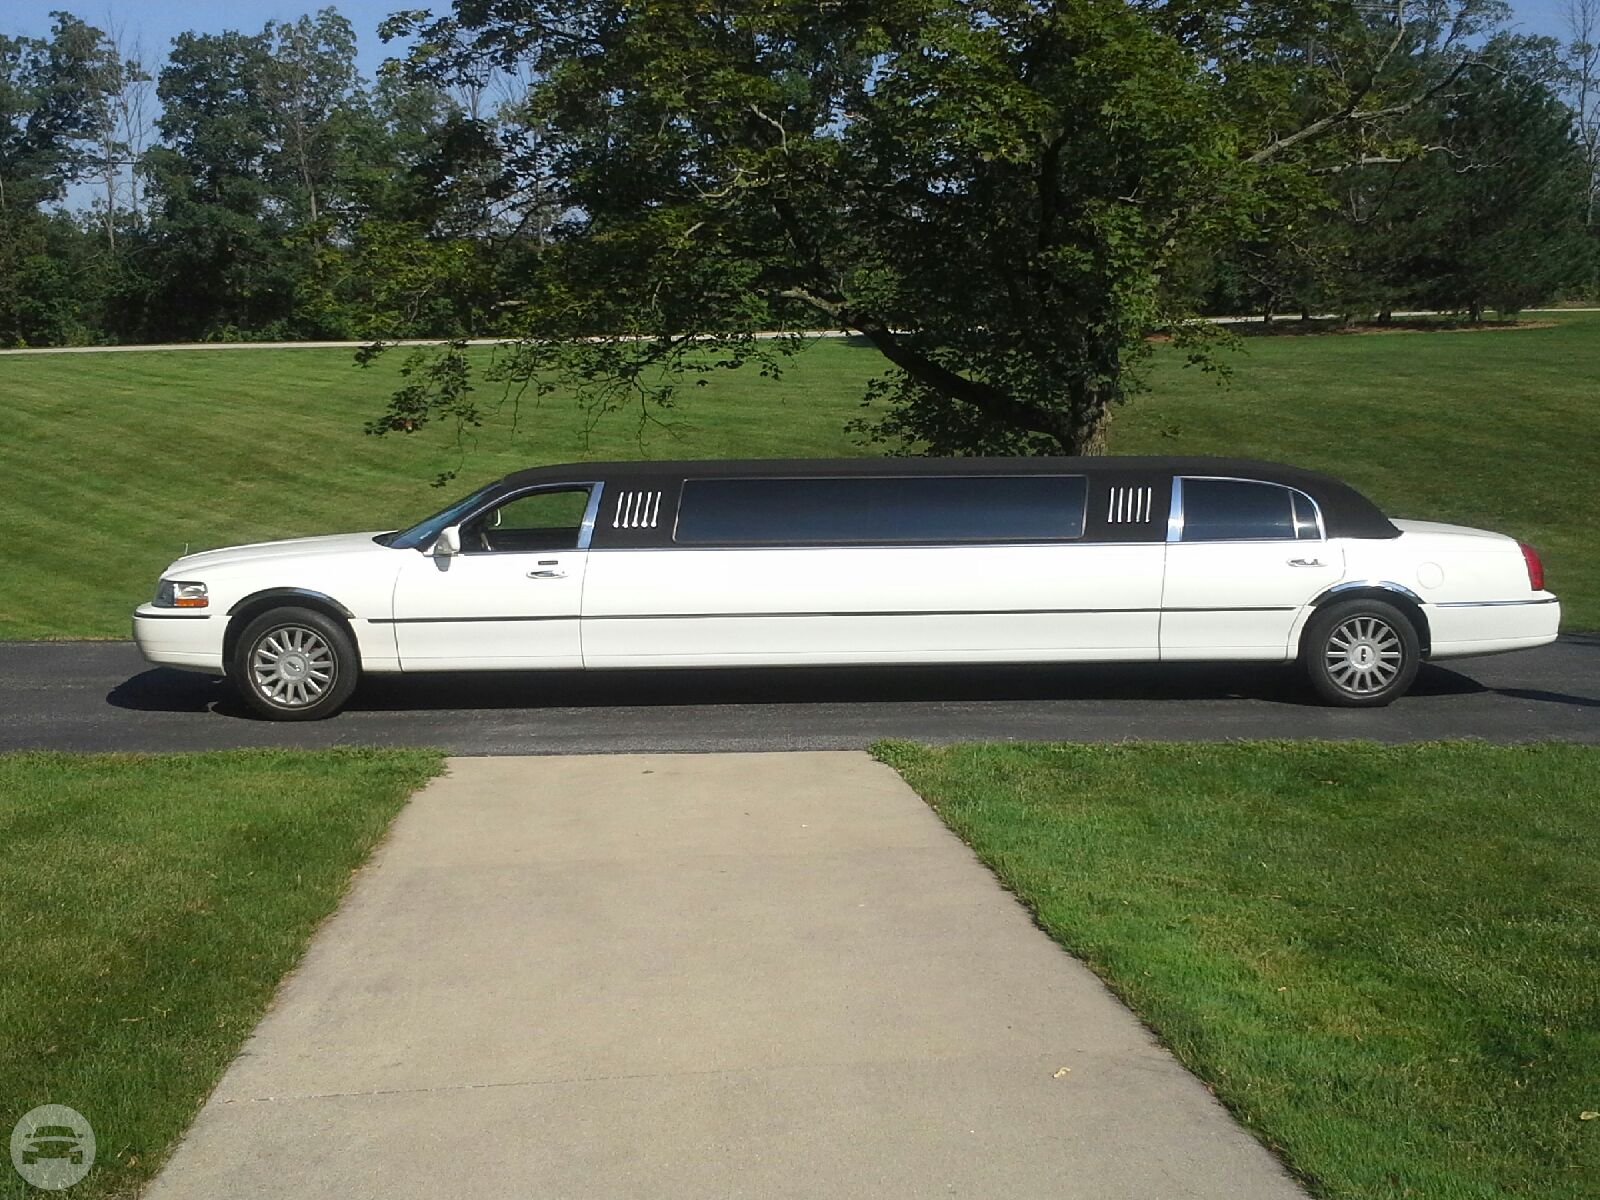 10 Passenger Limousine
Limo /
Fremont, OH 43420

 / Hourly $0.00
